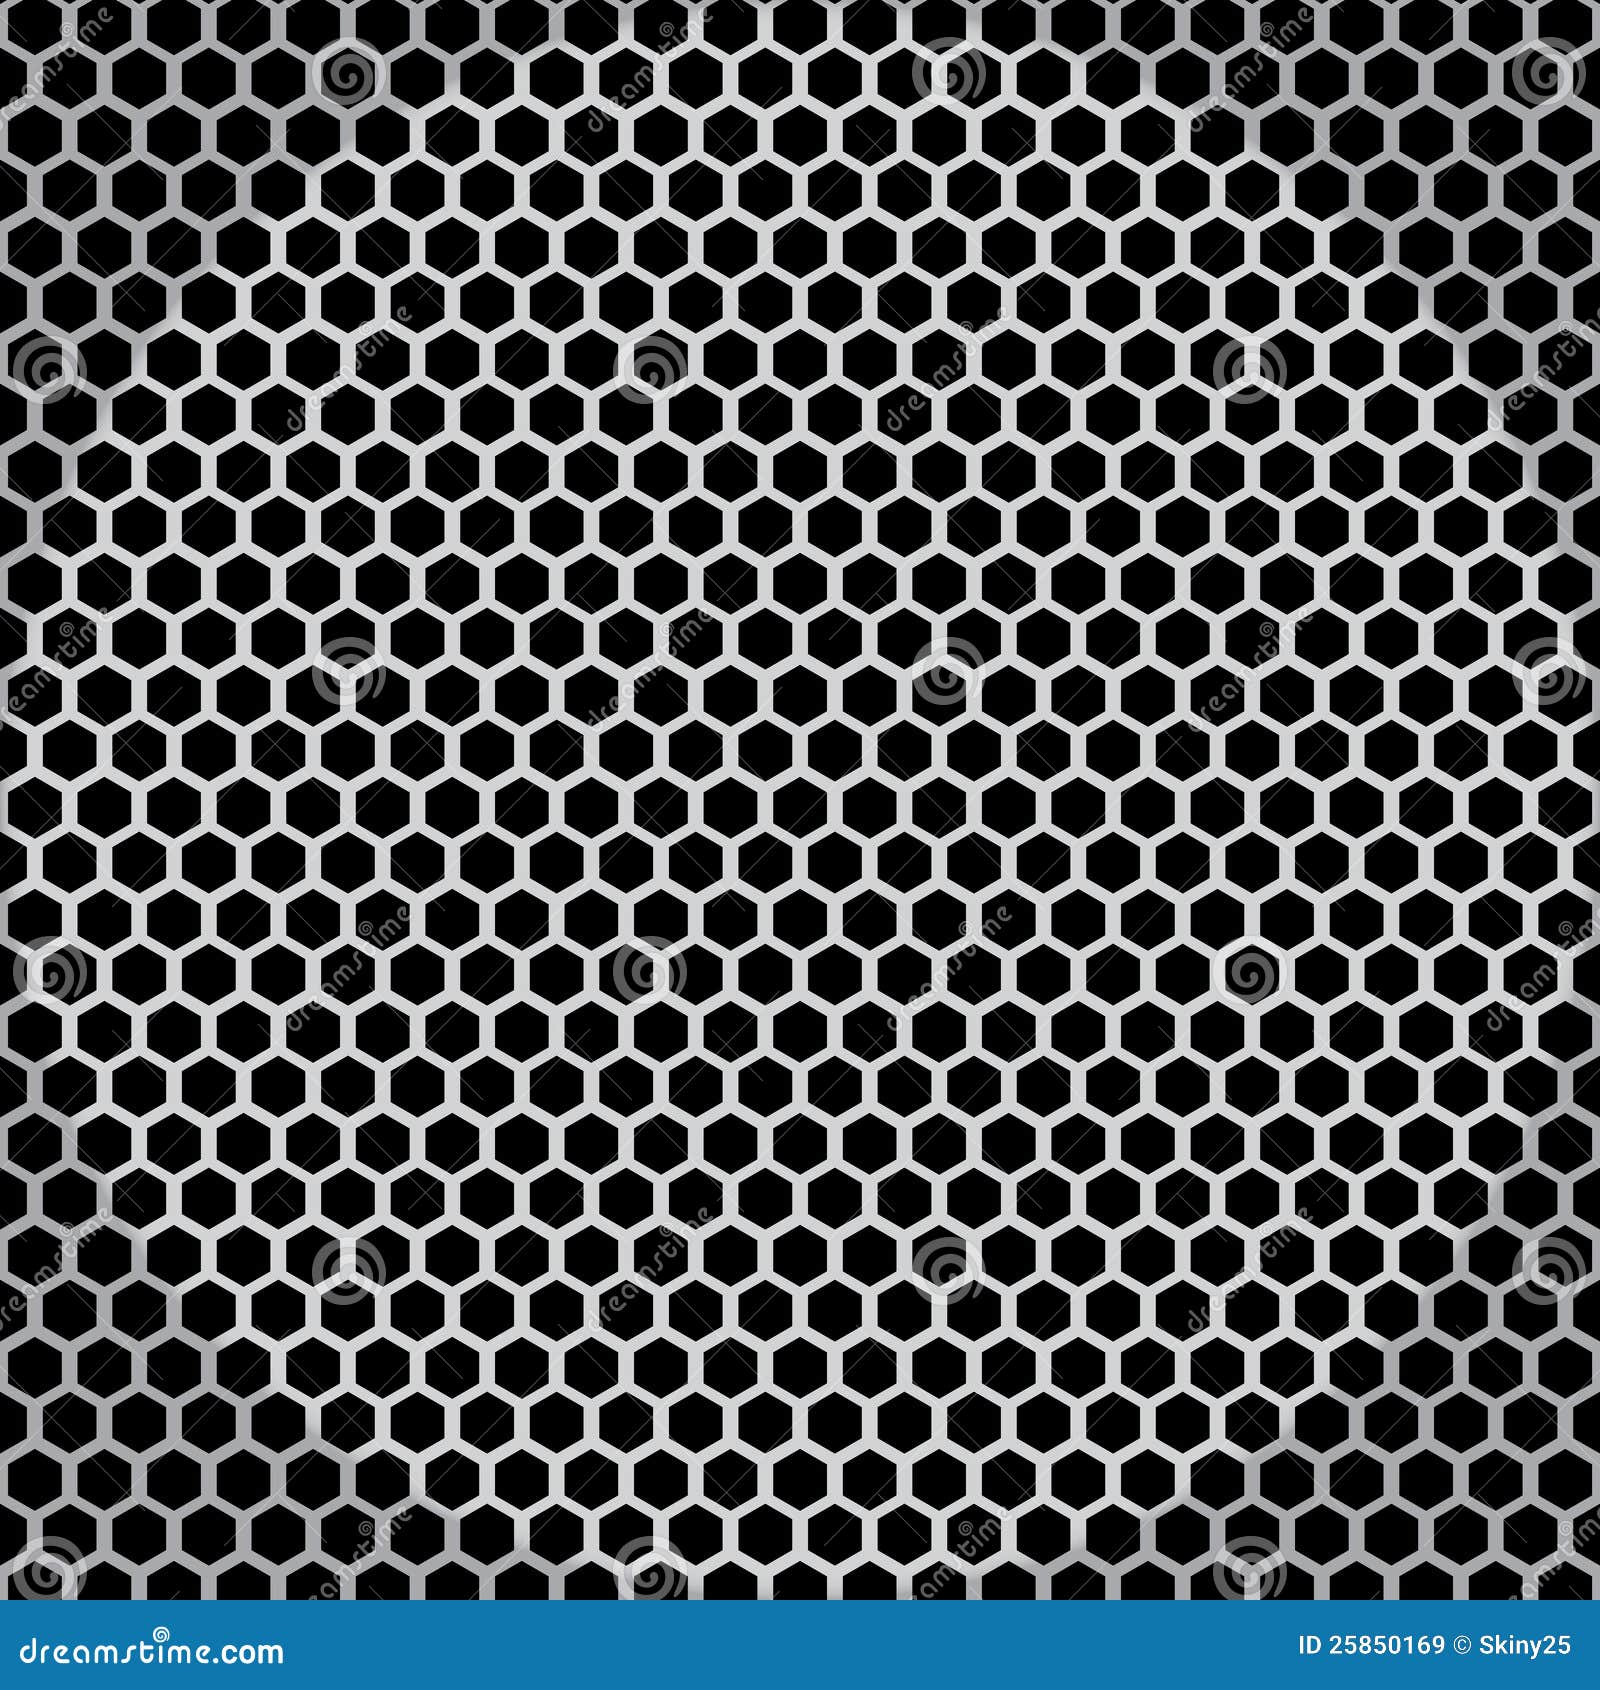 Metal Net Seamless Texture Royalty Free Stock Images ...